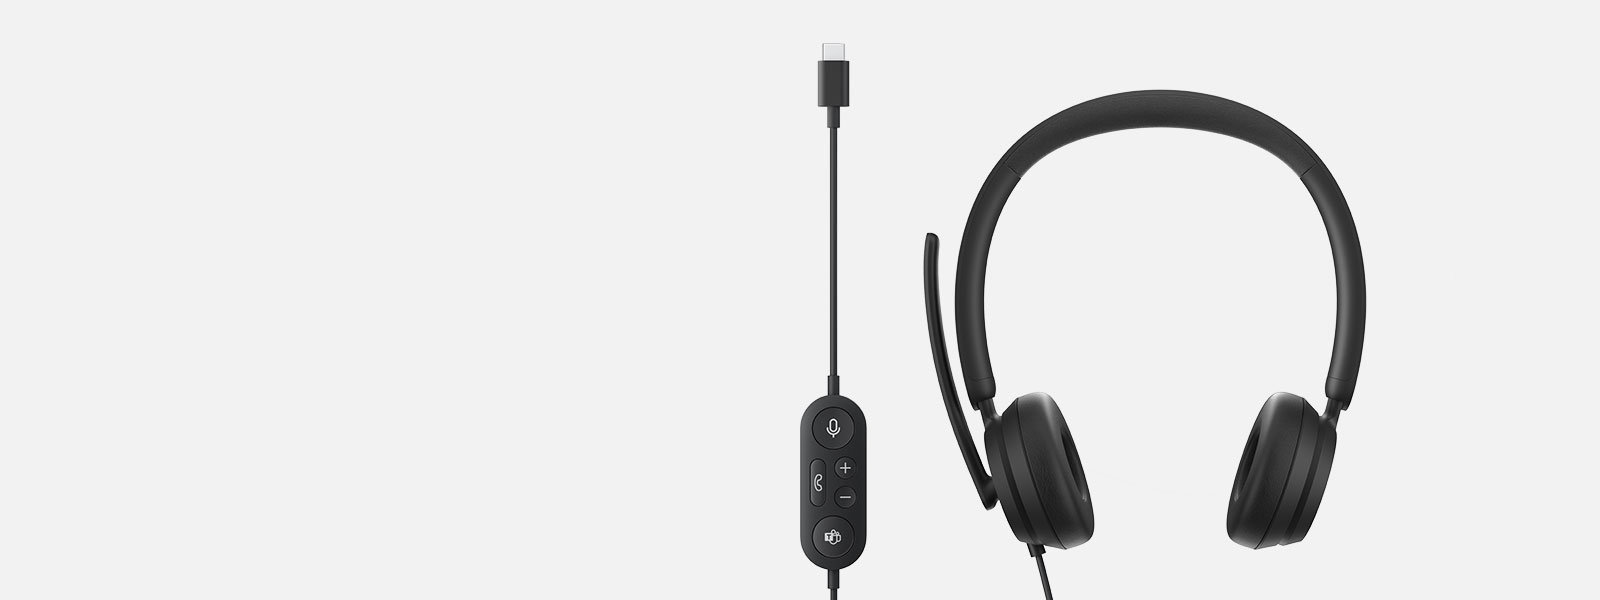 Microsoft Modern USB-C Headset with Noise Reducing Certified for Teams | Microsoft Accessories